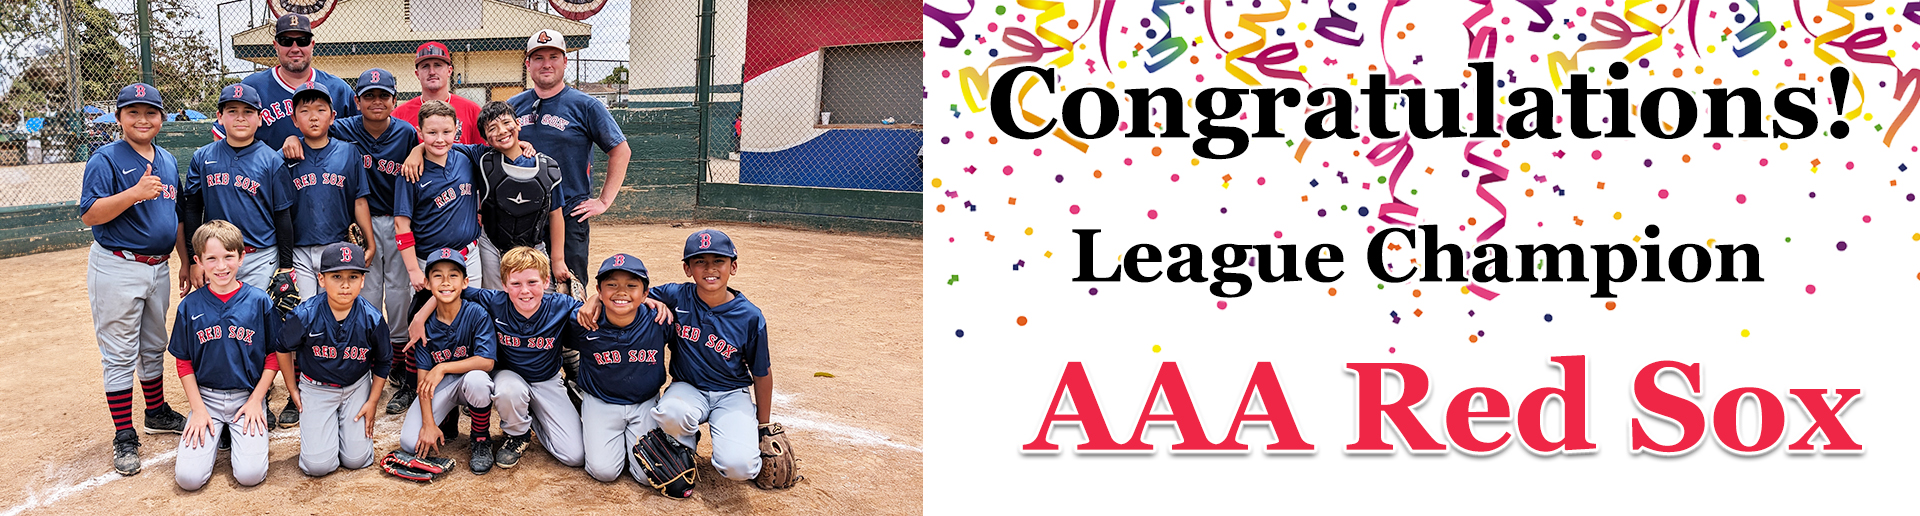 League Champs AAA Red Sox